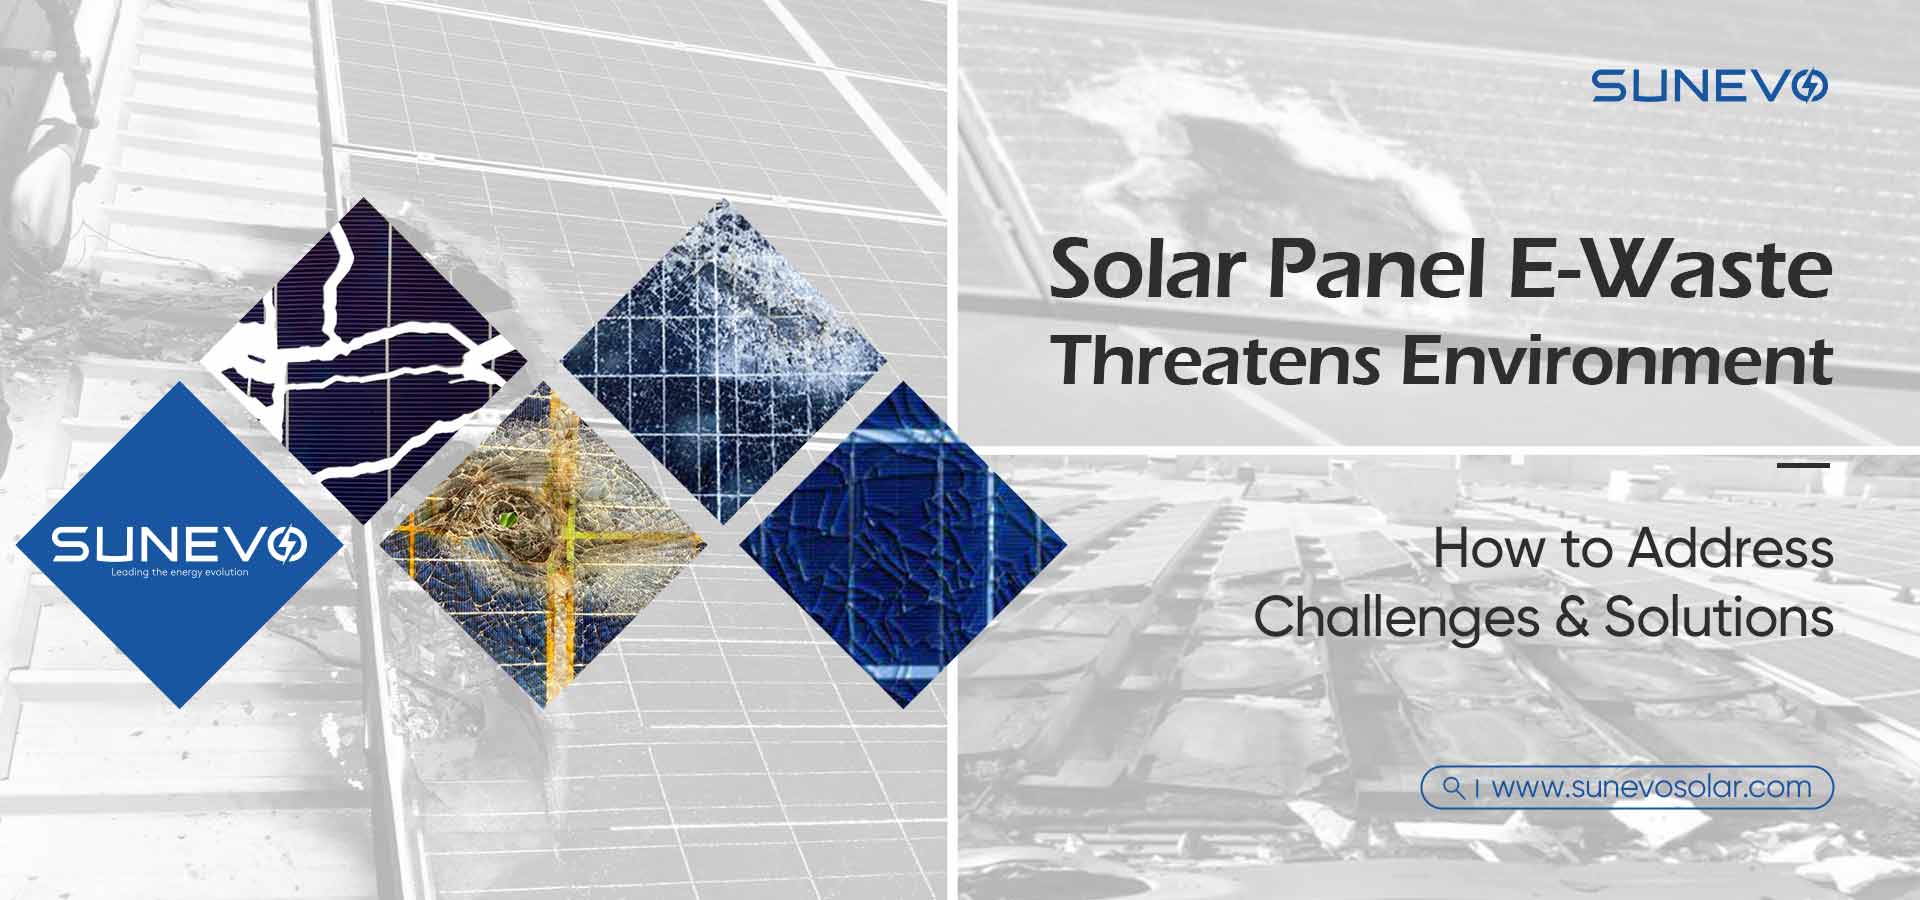 Solar Panel E-Waste: How to Address Challenges & Solutions